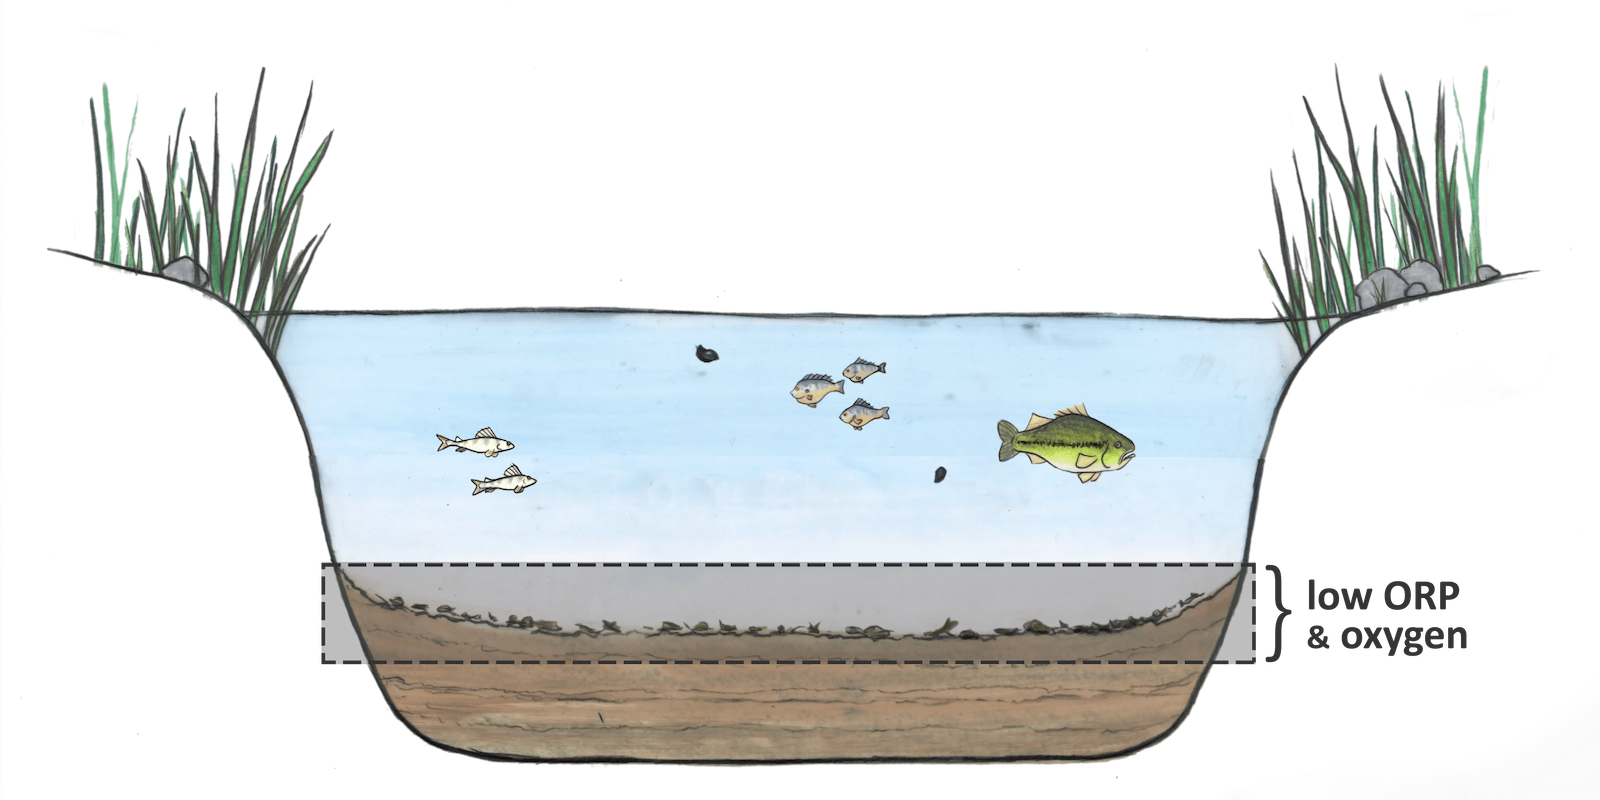 Hand drawn image of a pond cross-section showing low ORP and low oxygen concentration near bottom sediments.